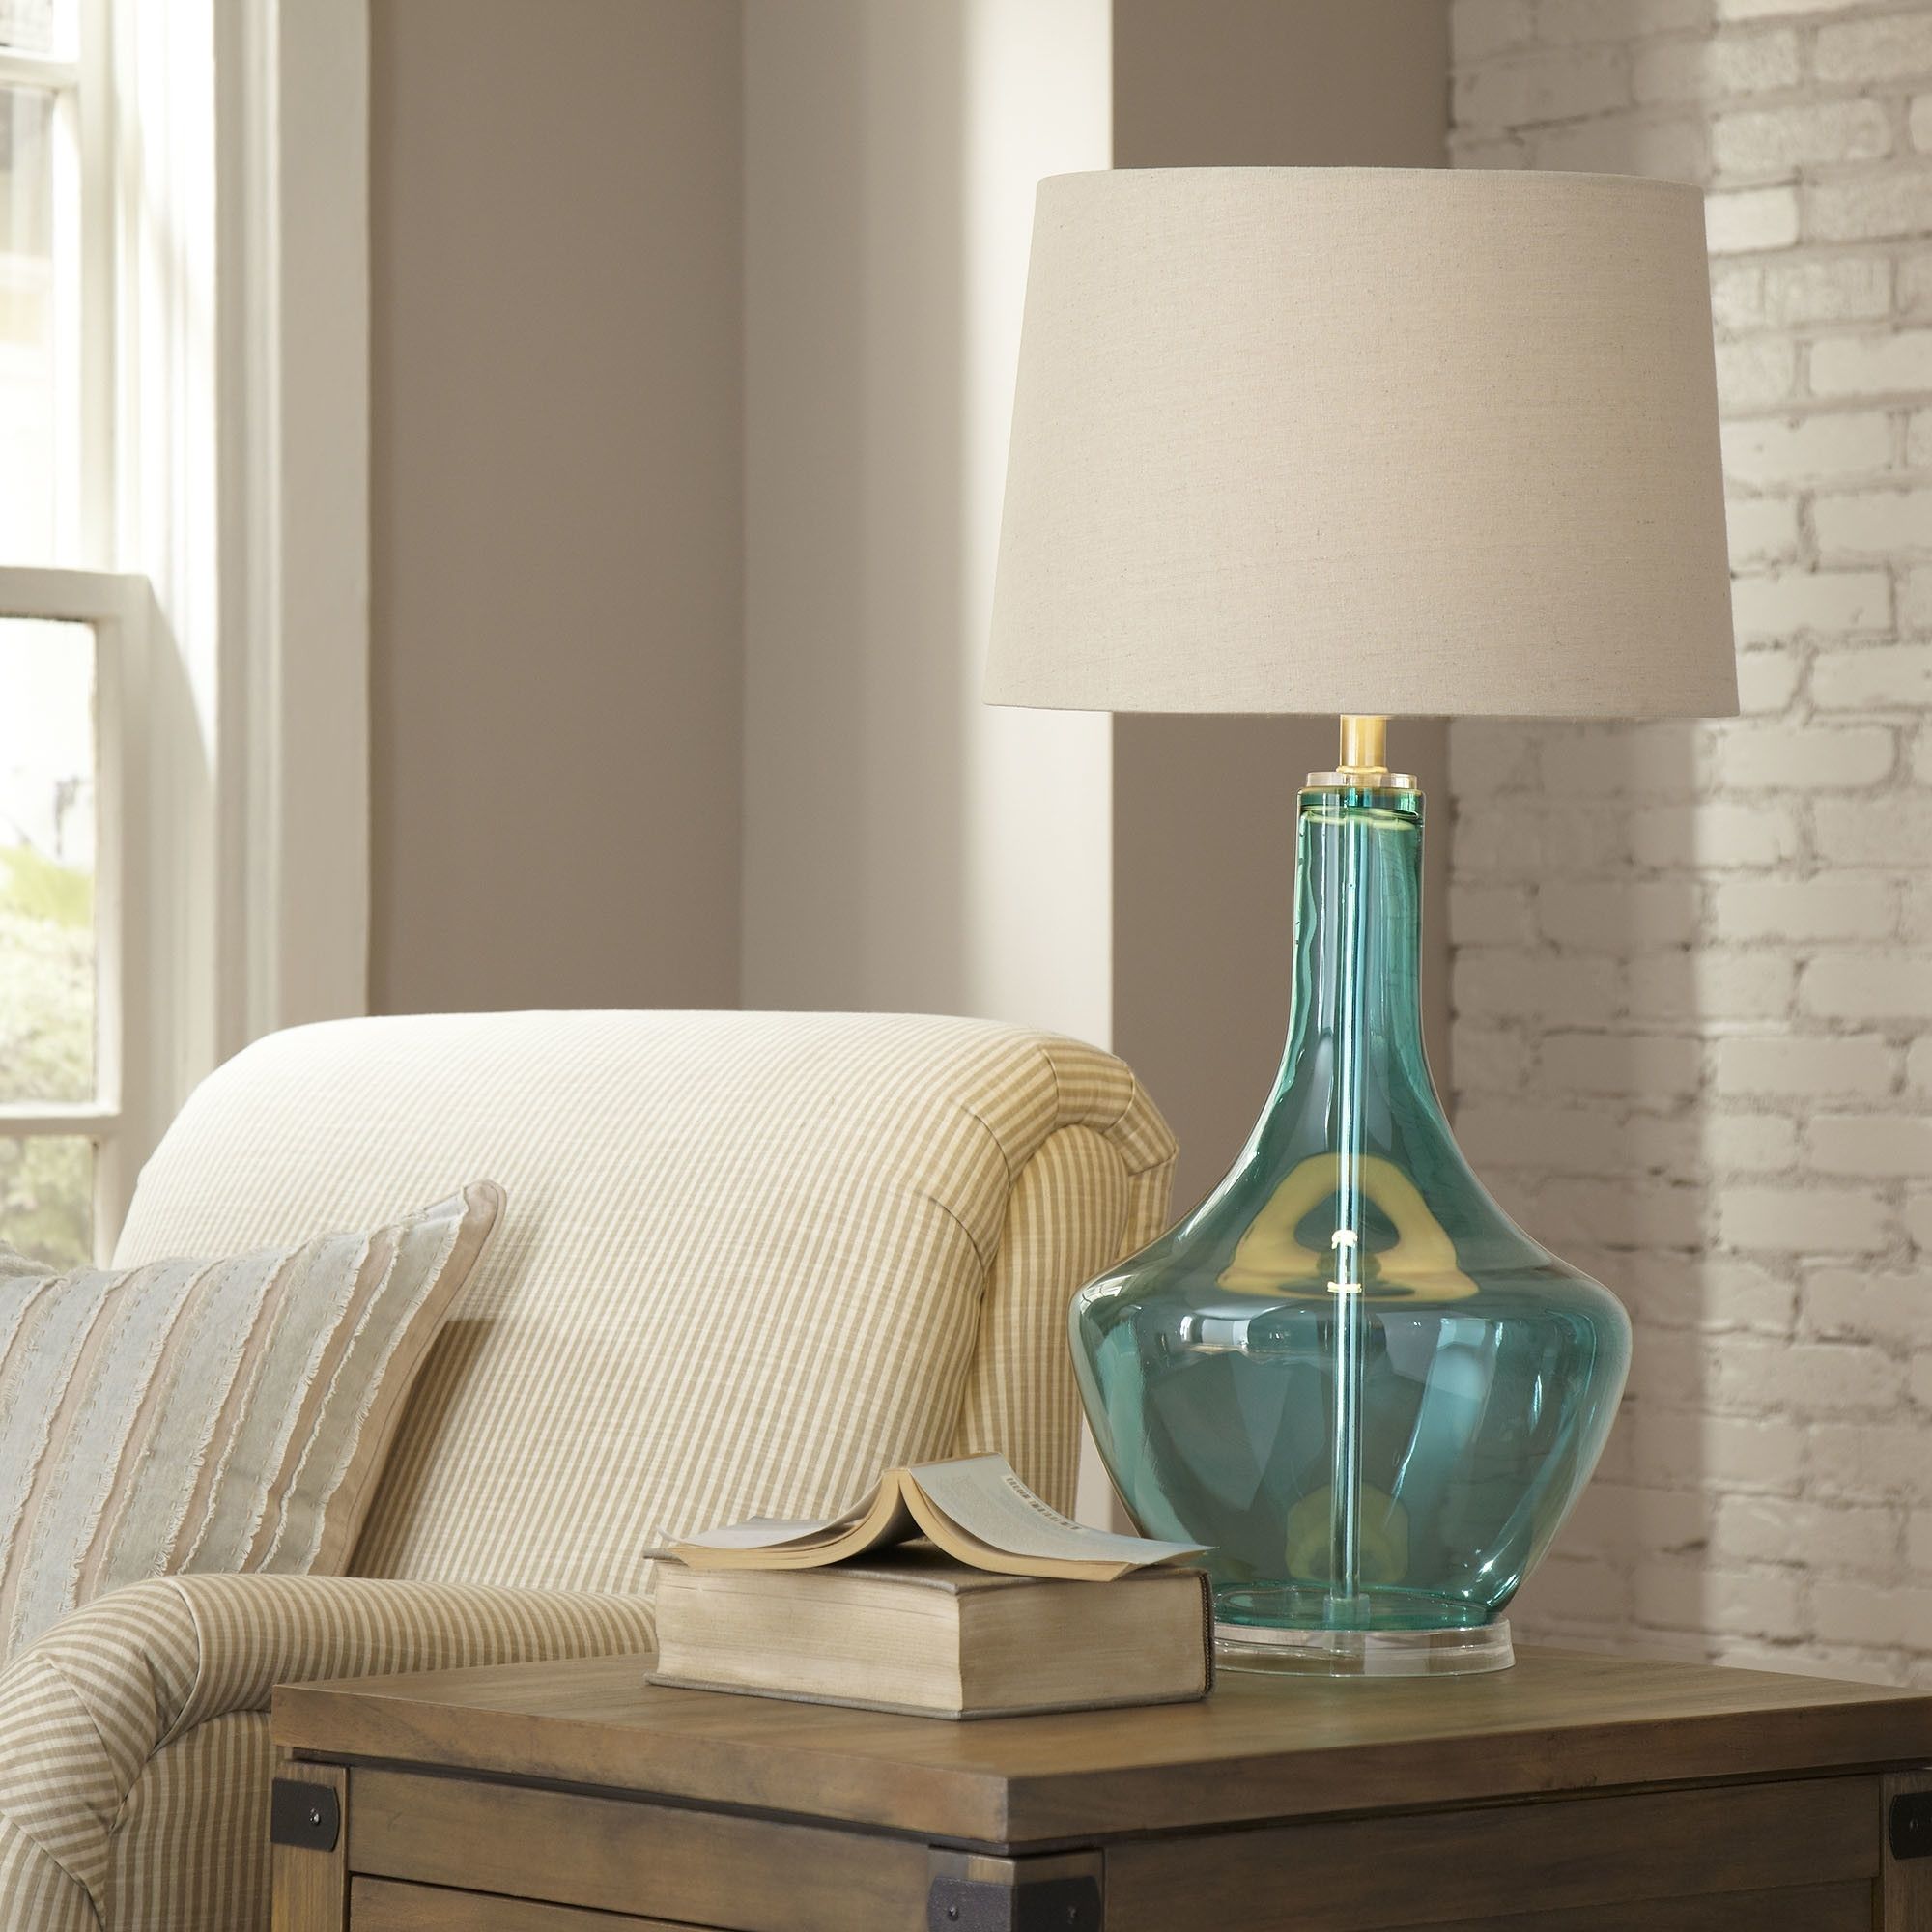 Top 53 Great Blue Table Lamp Touch Bedside Lamps Silver Glass Shades In Big Living Room Table Lamps (View 9 of 15)